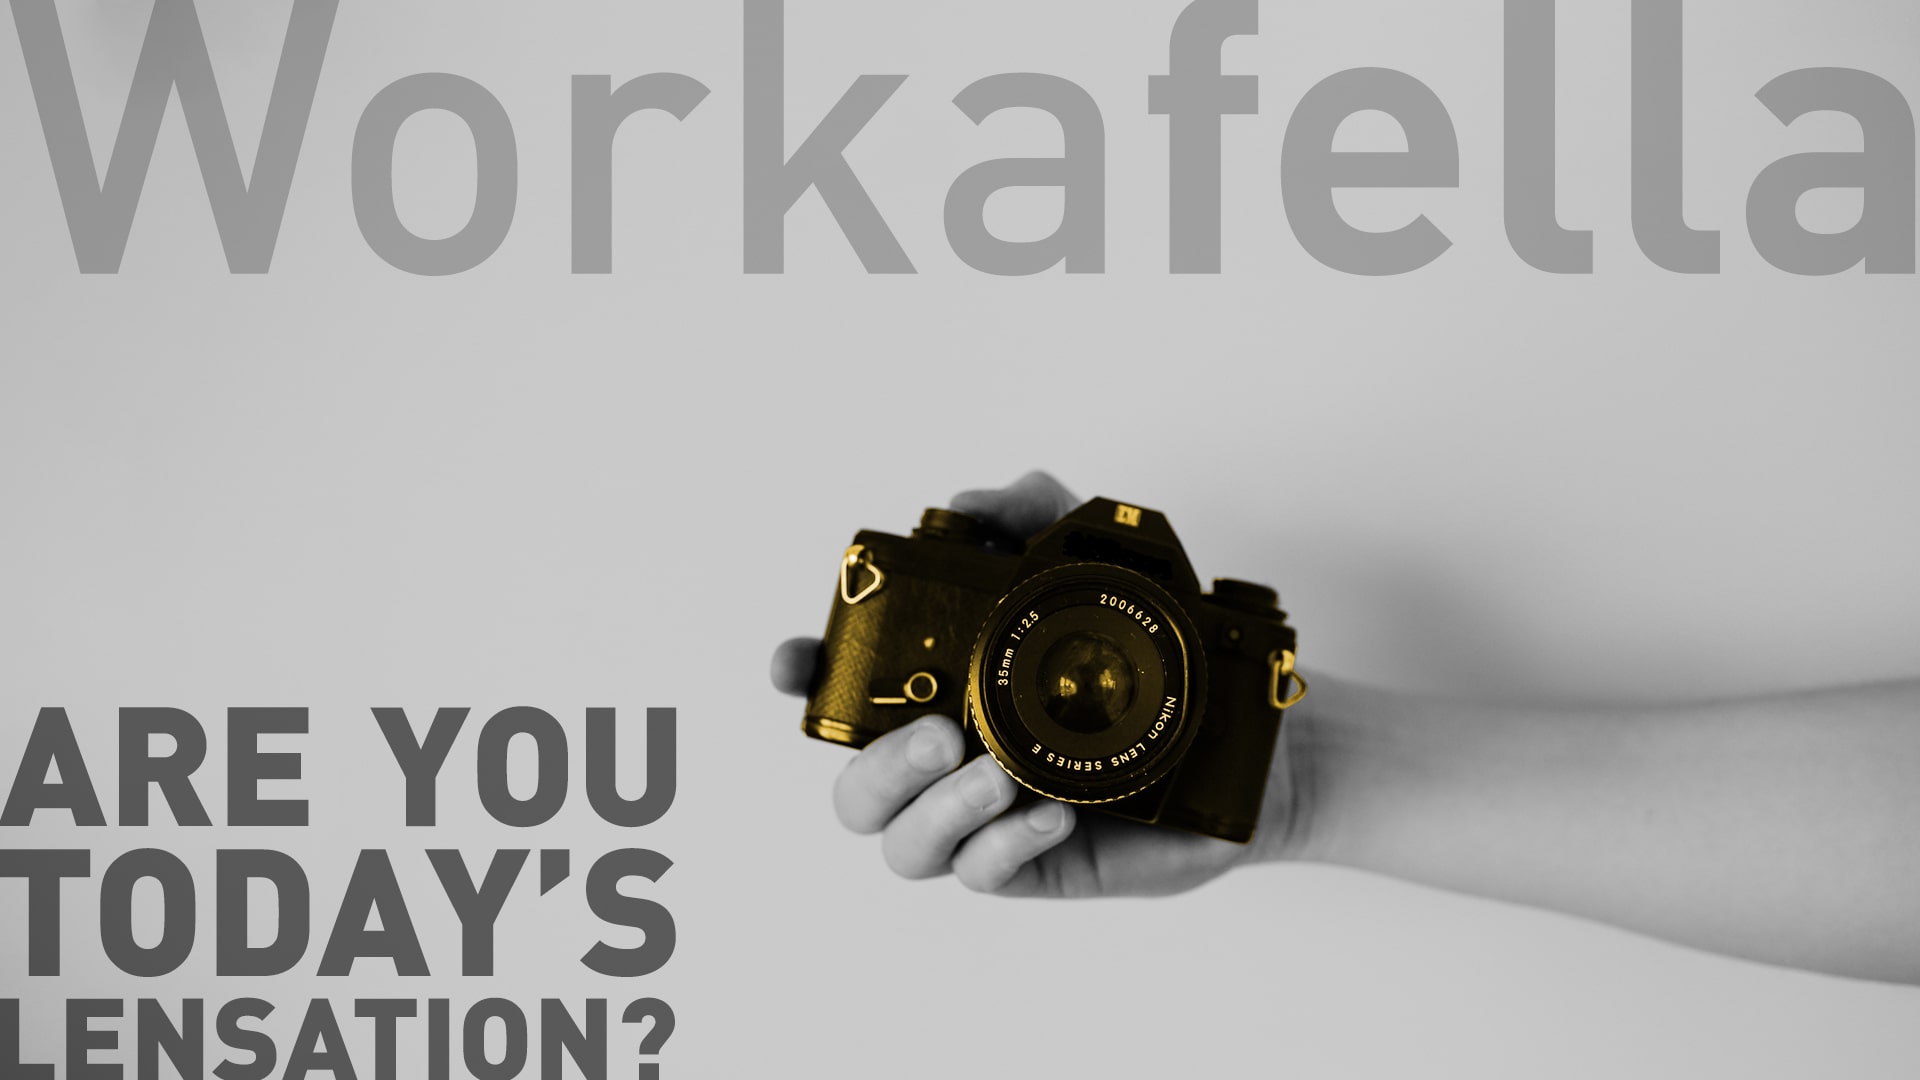 Photography Contest at Workafella